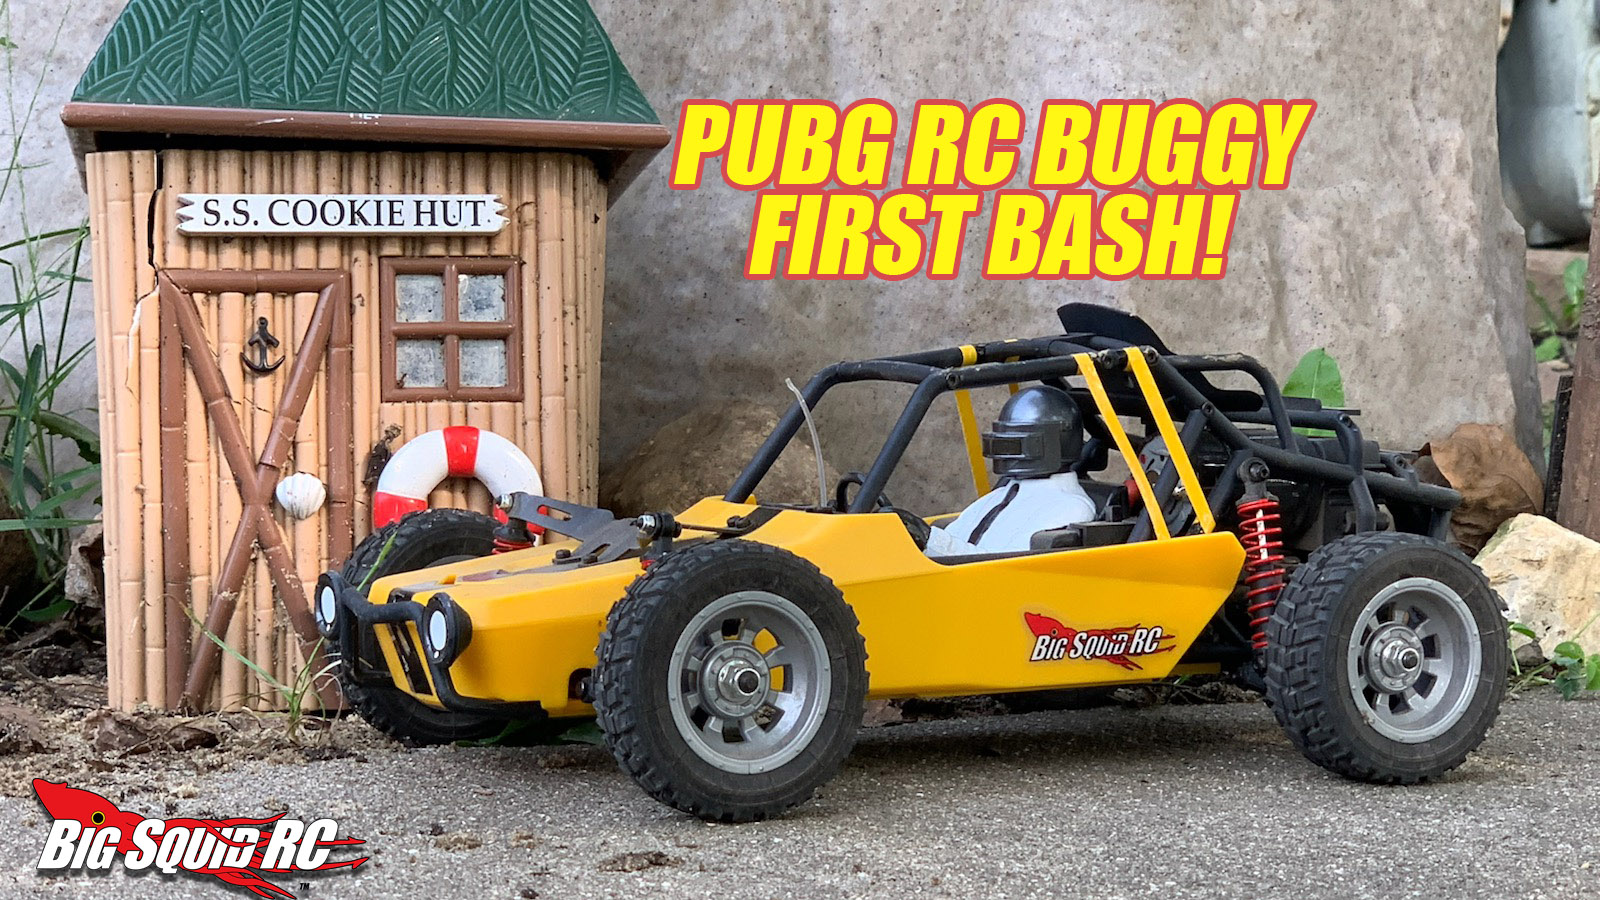 Pubg Buggy From Ttrcsport First Bash Video Big Squid Rc Rc Car And Truck News Reviews Videos And More